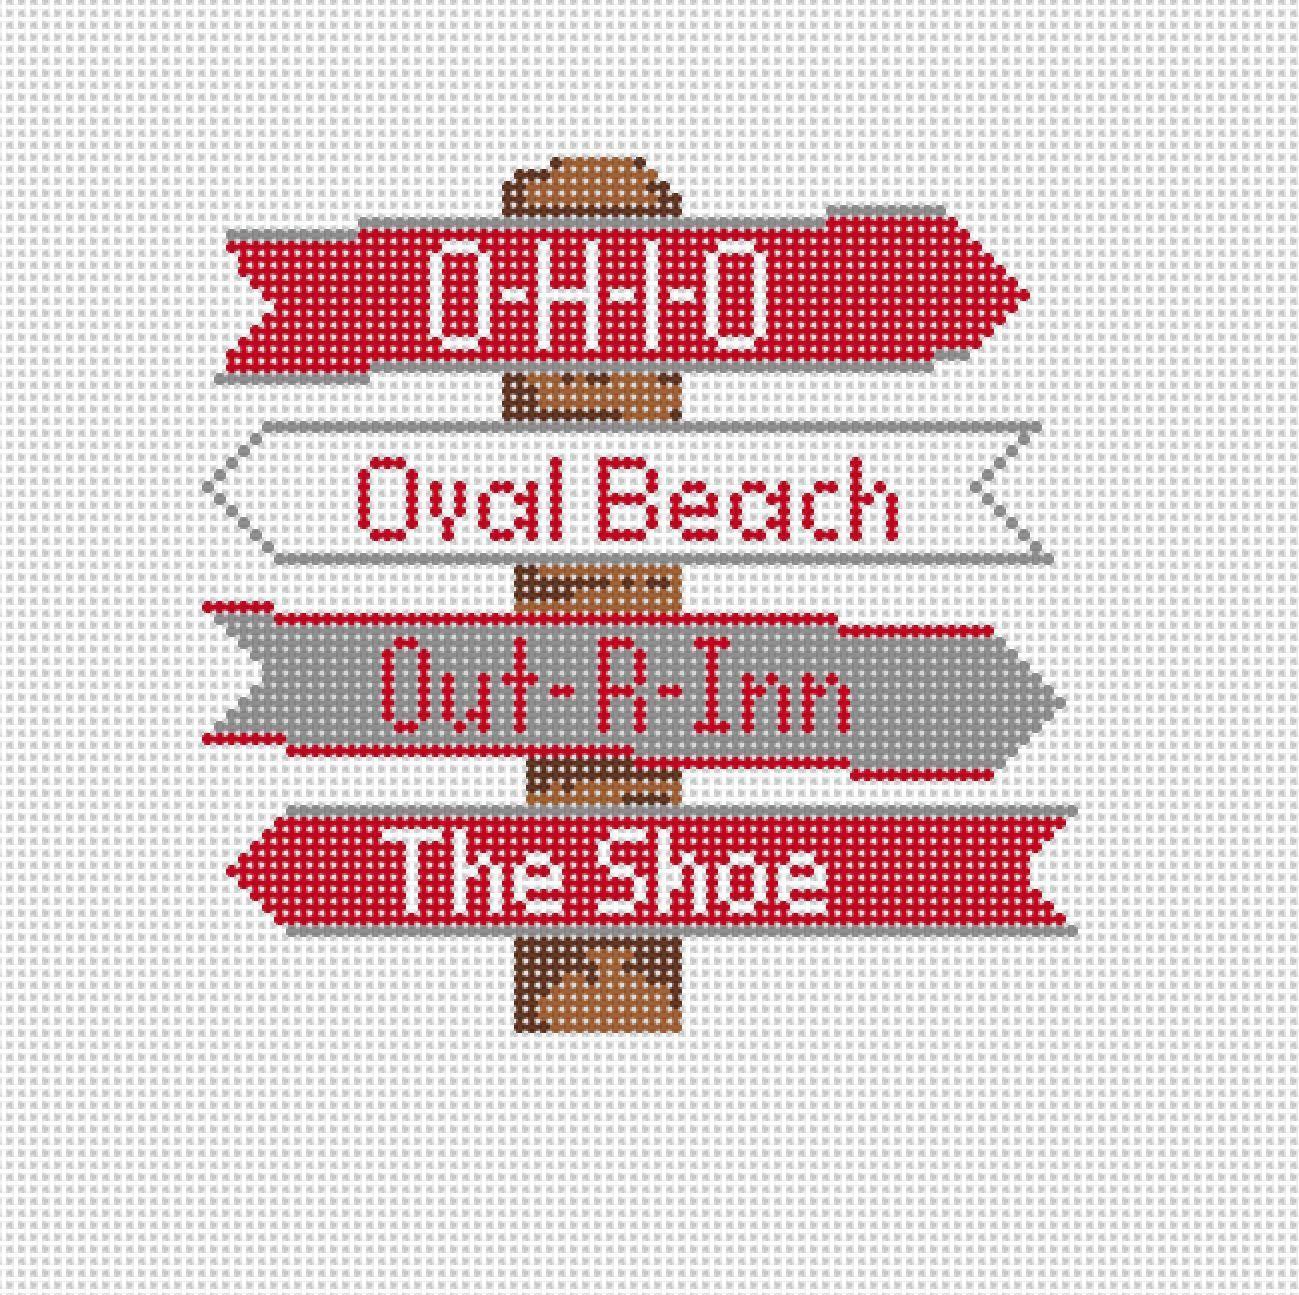 Ohio State College Icon Destination Sign - Needlepoint by Laura